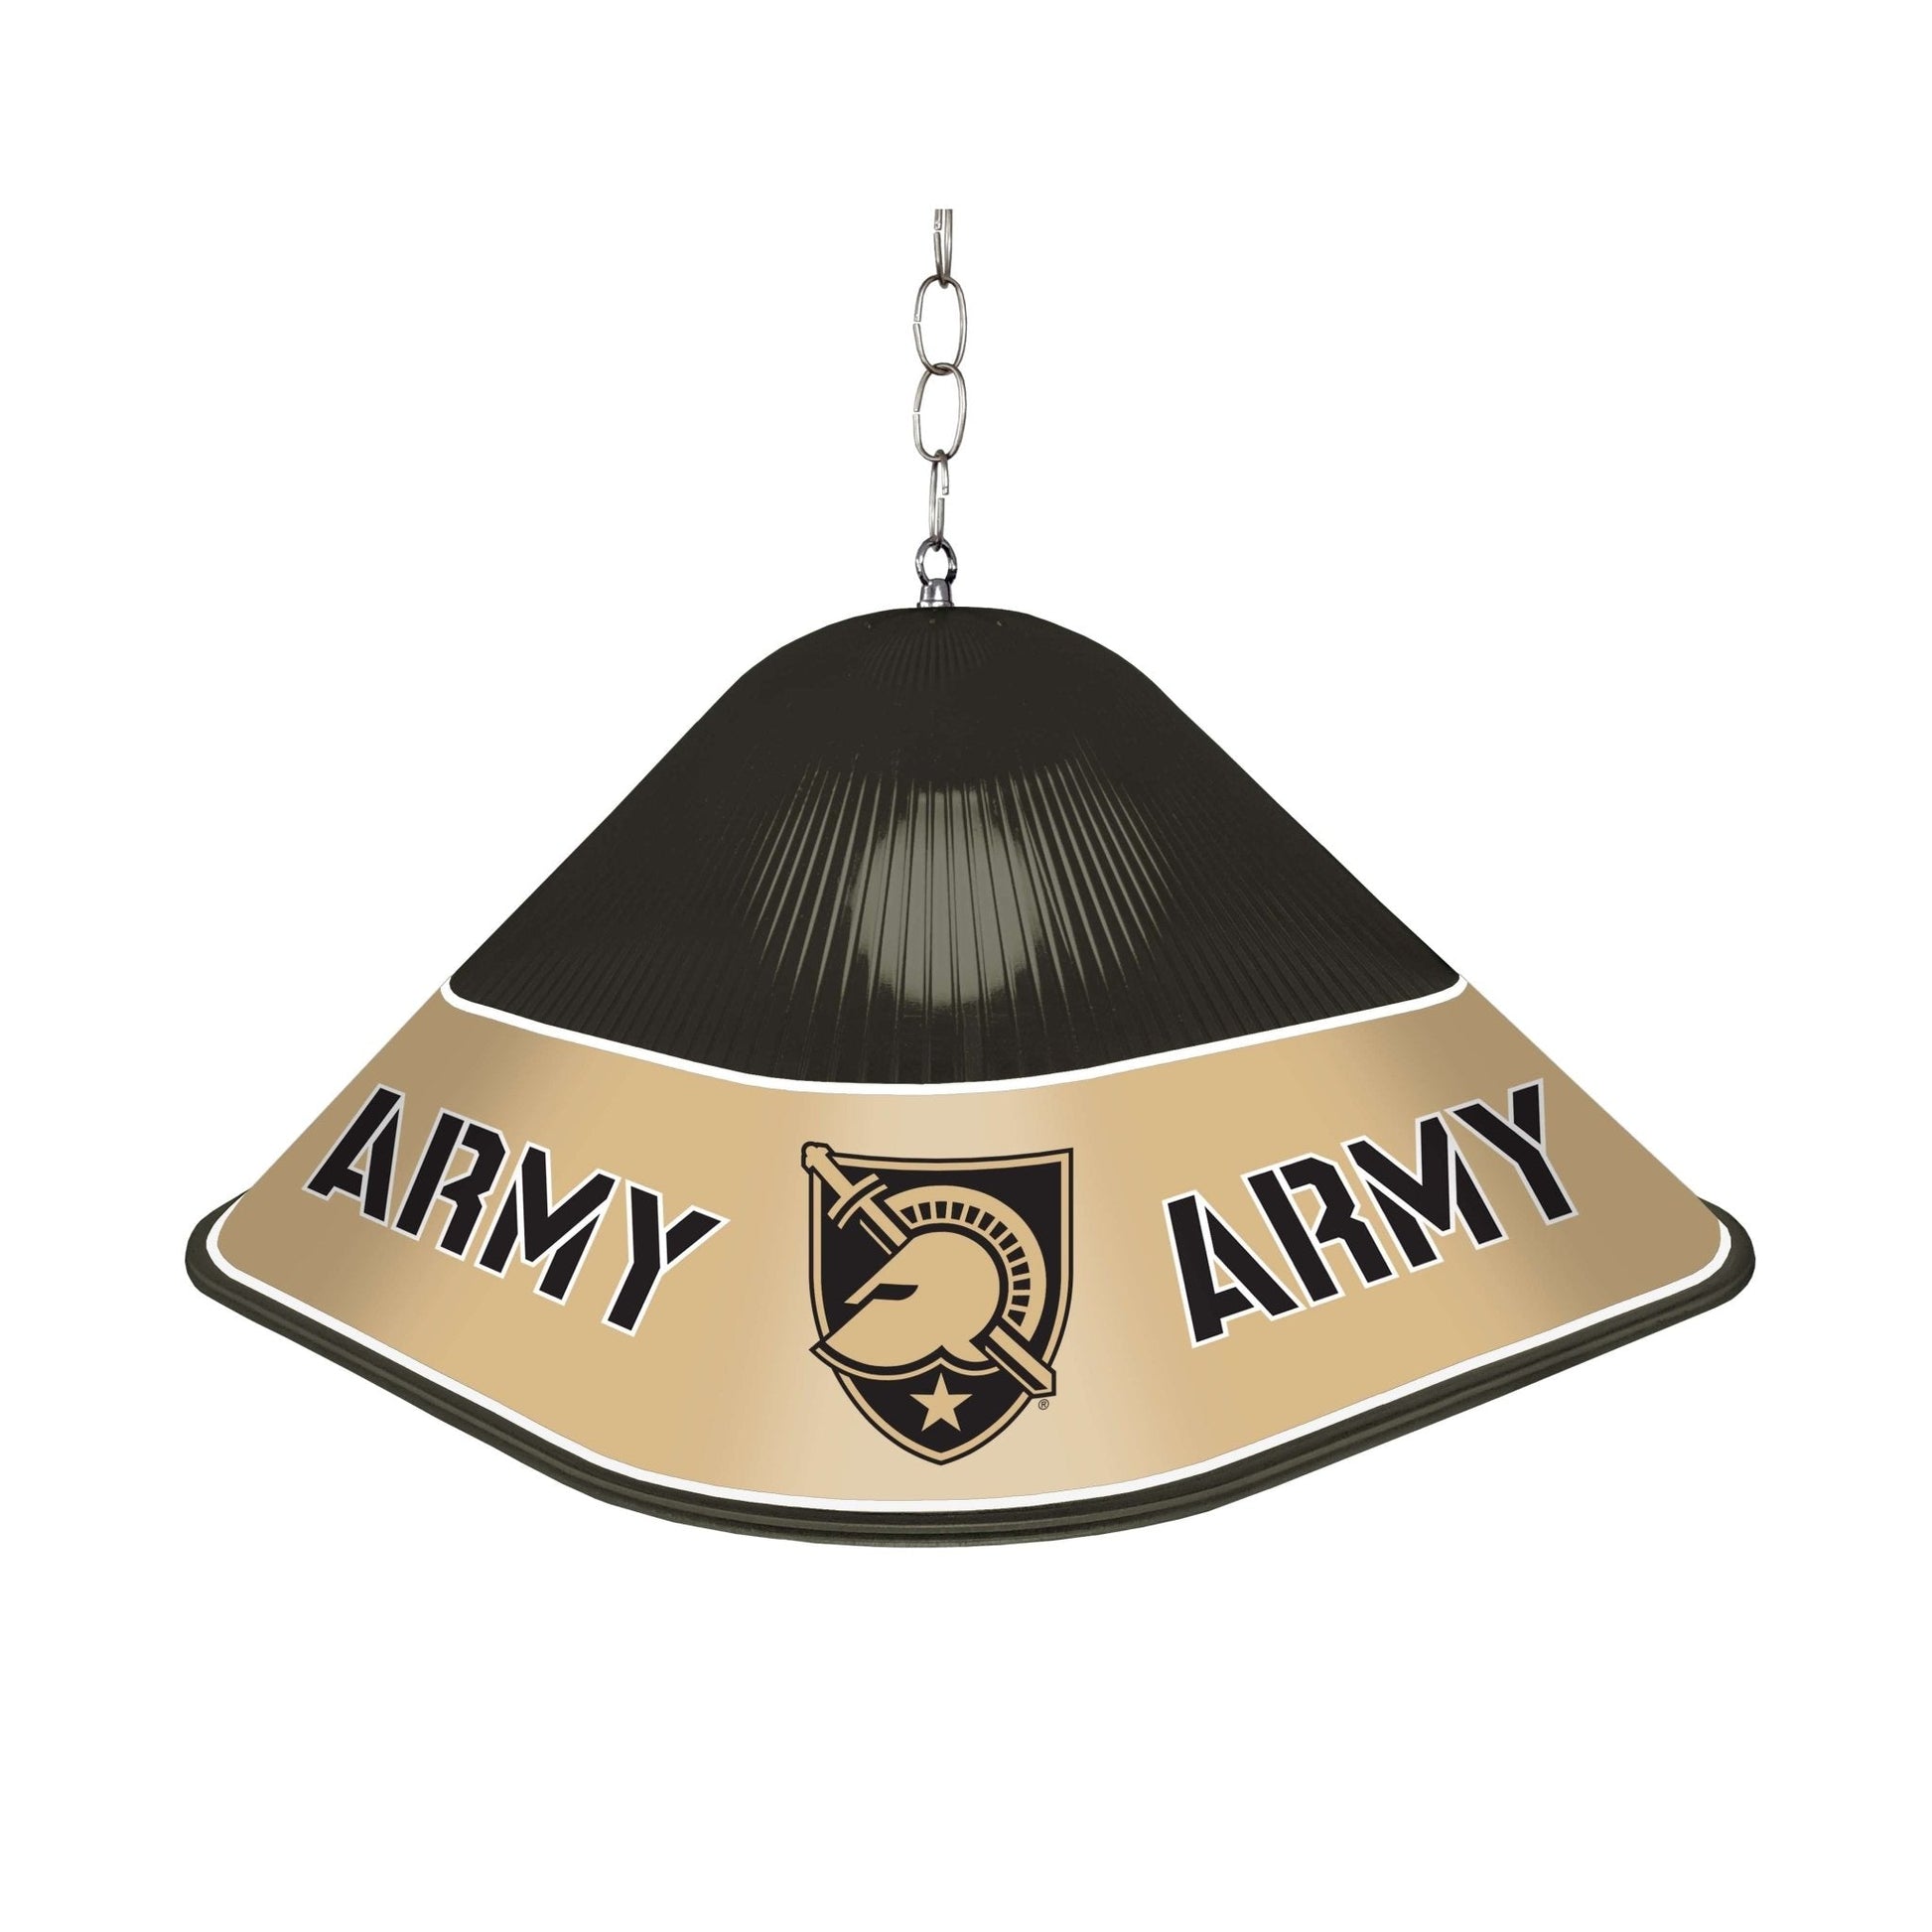 Army Black Knights: Game Table Light Default Title